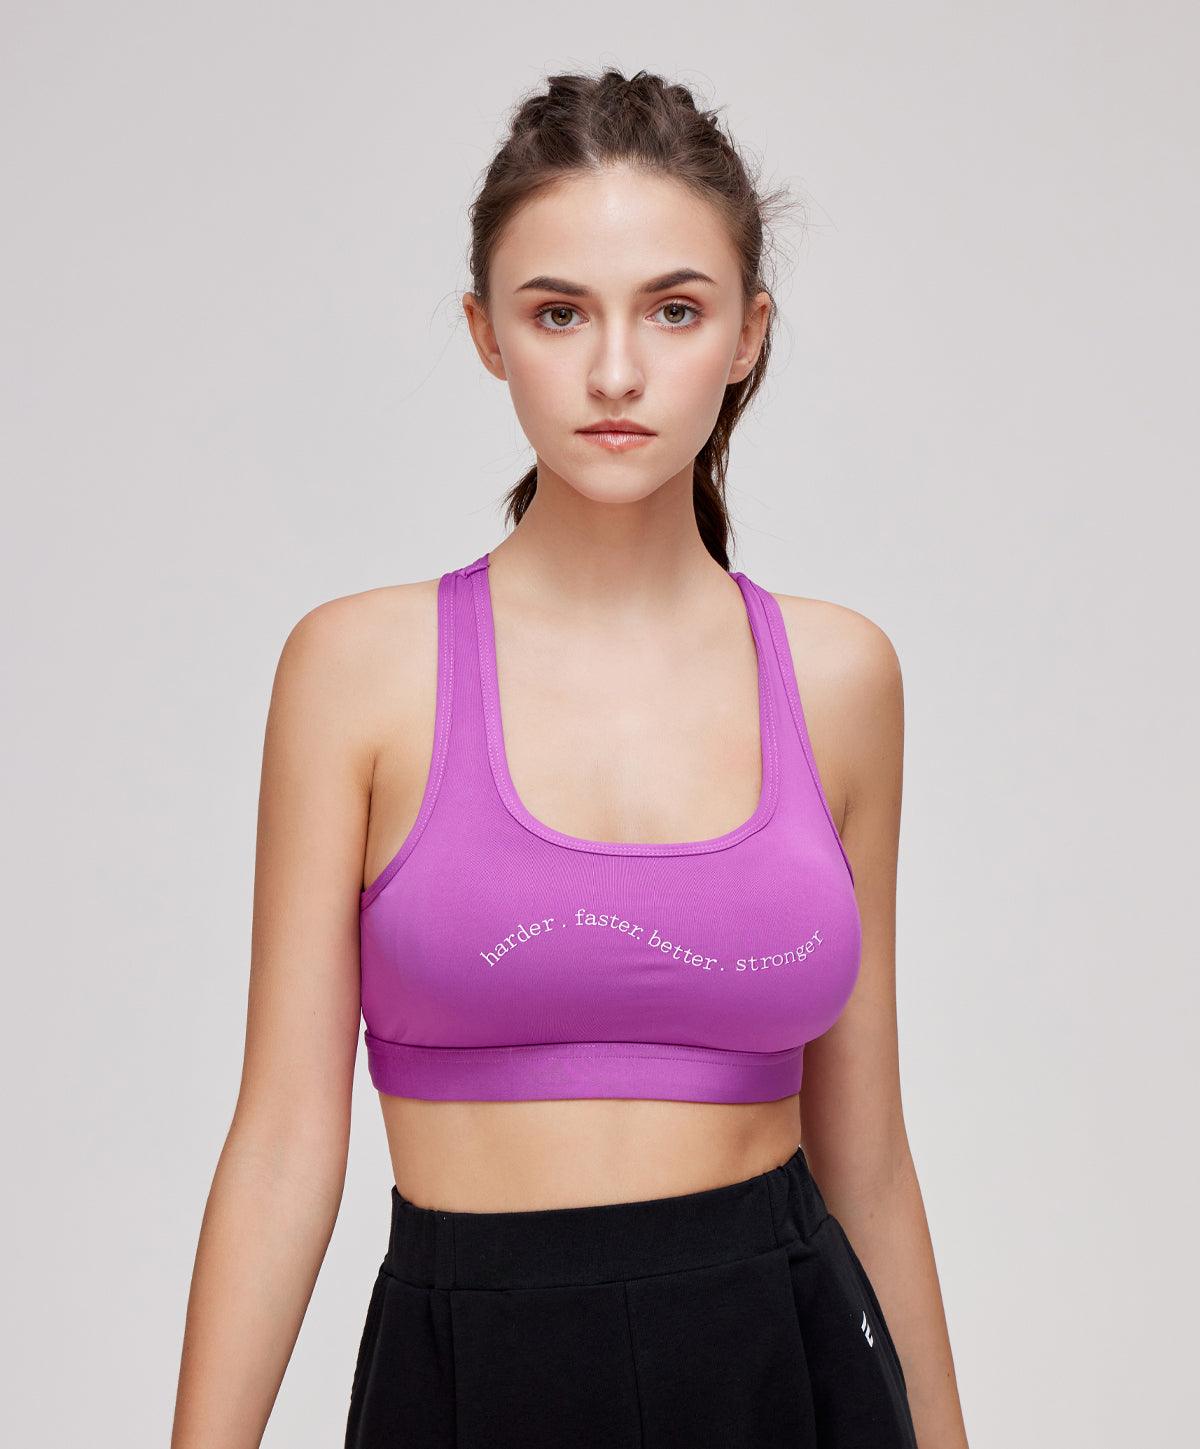 Products Tagged sports bra - Pierre Cardin Lingerie